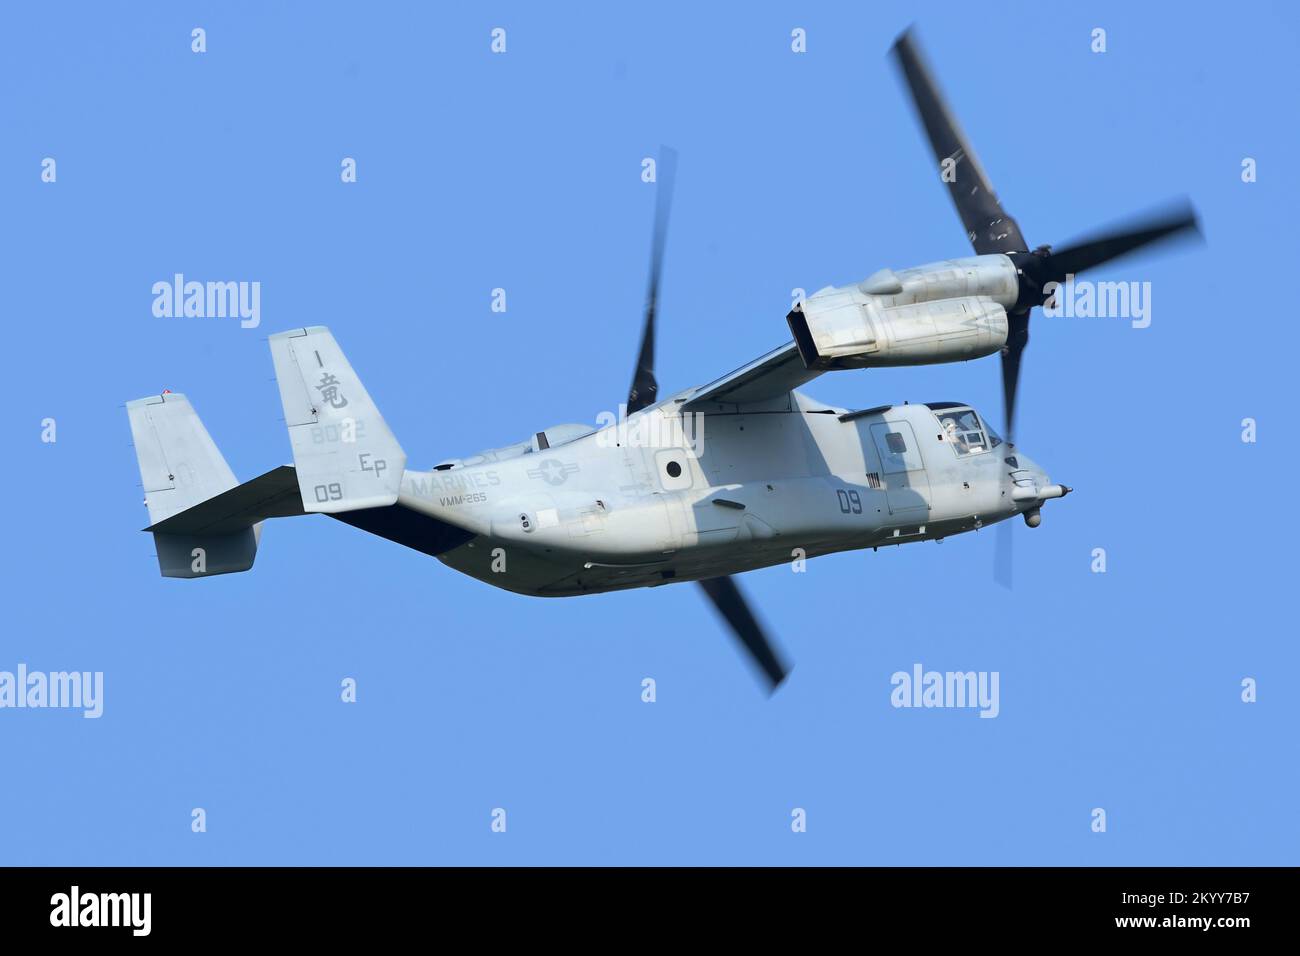 Kanagawa Prefecture, Japan - July 15, 2014: US Marine Corps Bell Boeing MV-22B Osprey tiltrotor military transport aircraft from VMM-265 Dragons. Stock Photo